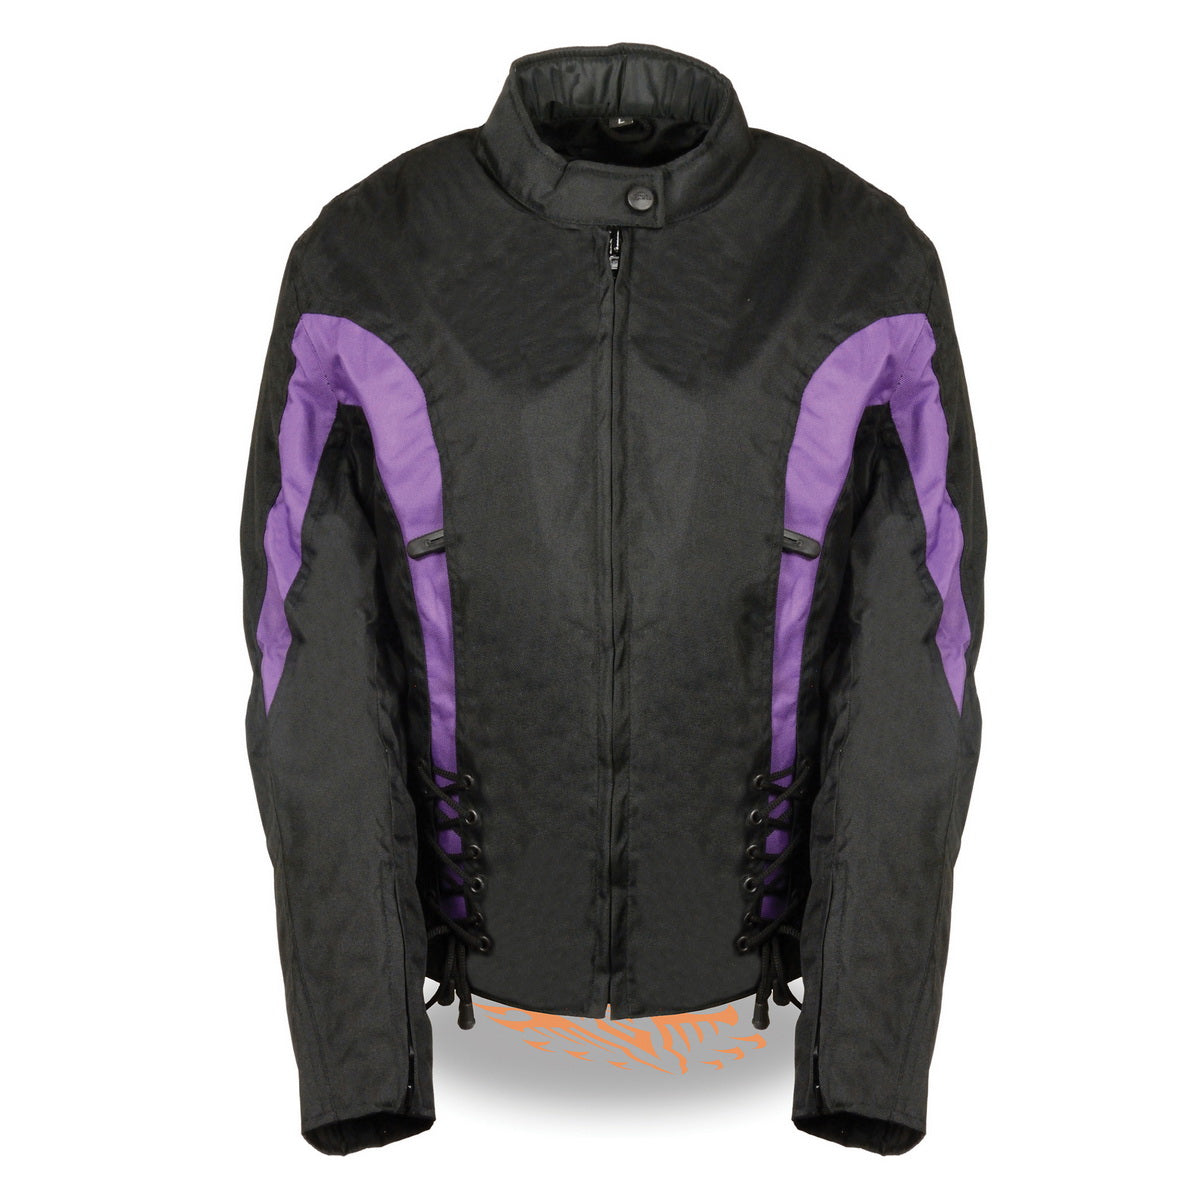 Nexgen SH2188 Women's Black and Purple Textile Motorcycle Riding Jacket with Side Stretch and Lacing